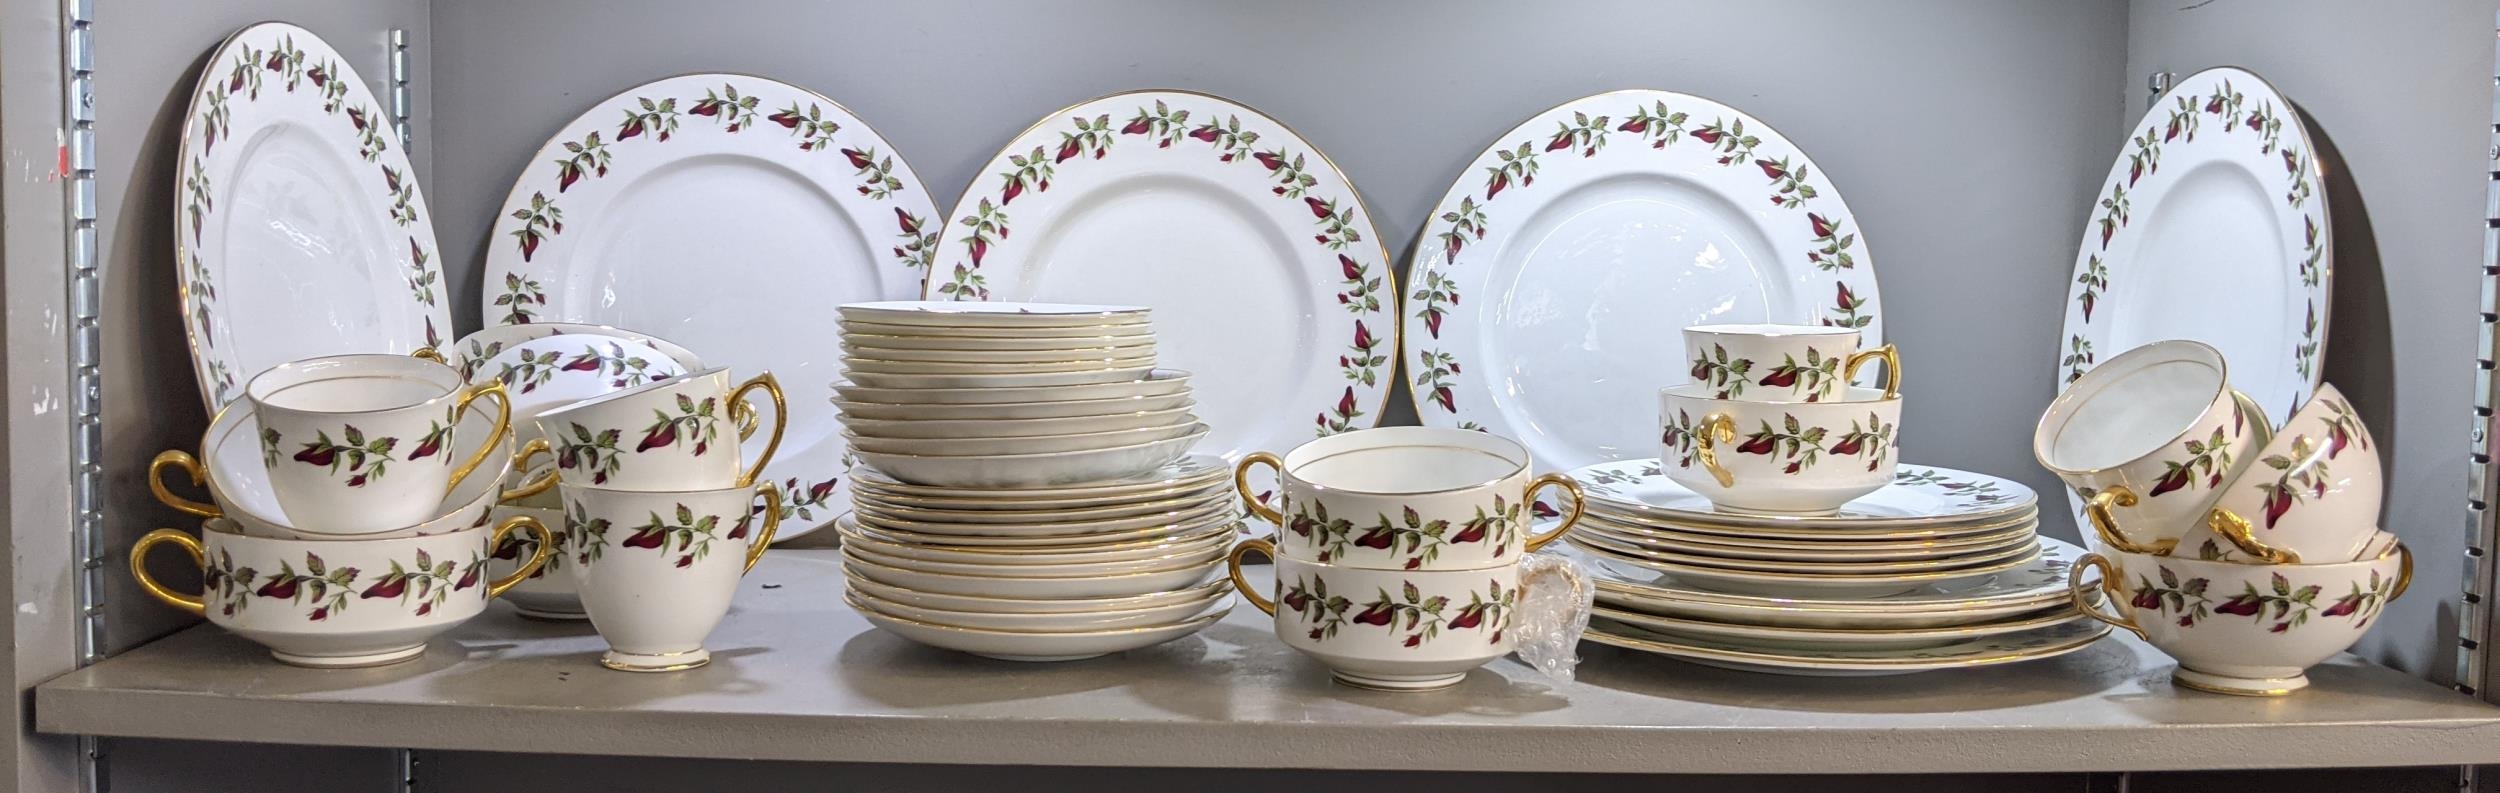 A Shelley 'Wild Roses' part dinner service comprising dinner plates, side plates cups and saucers,